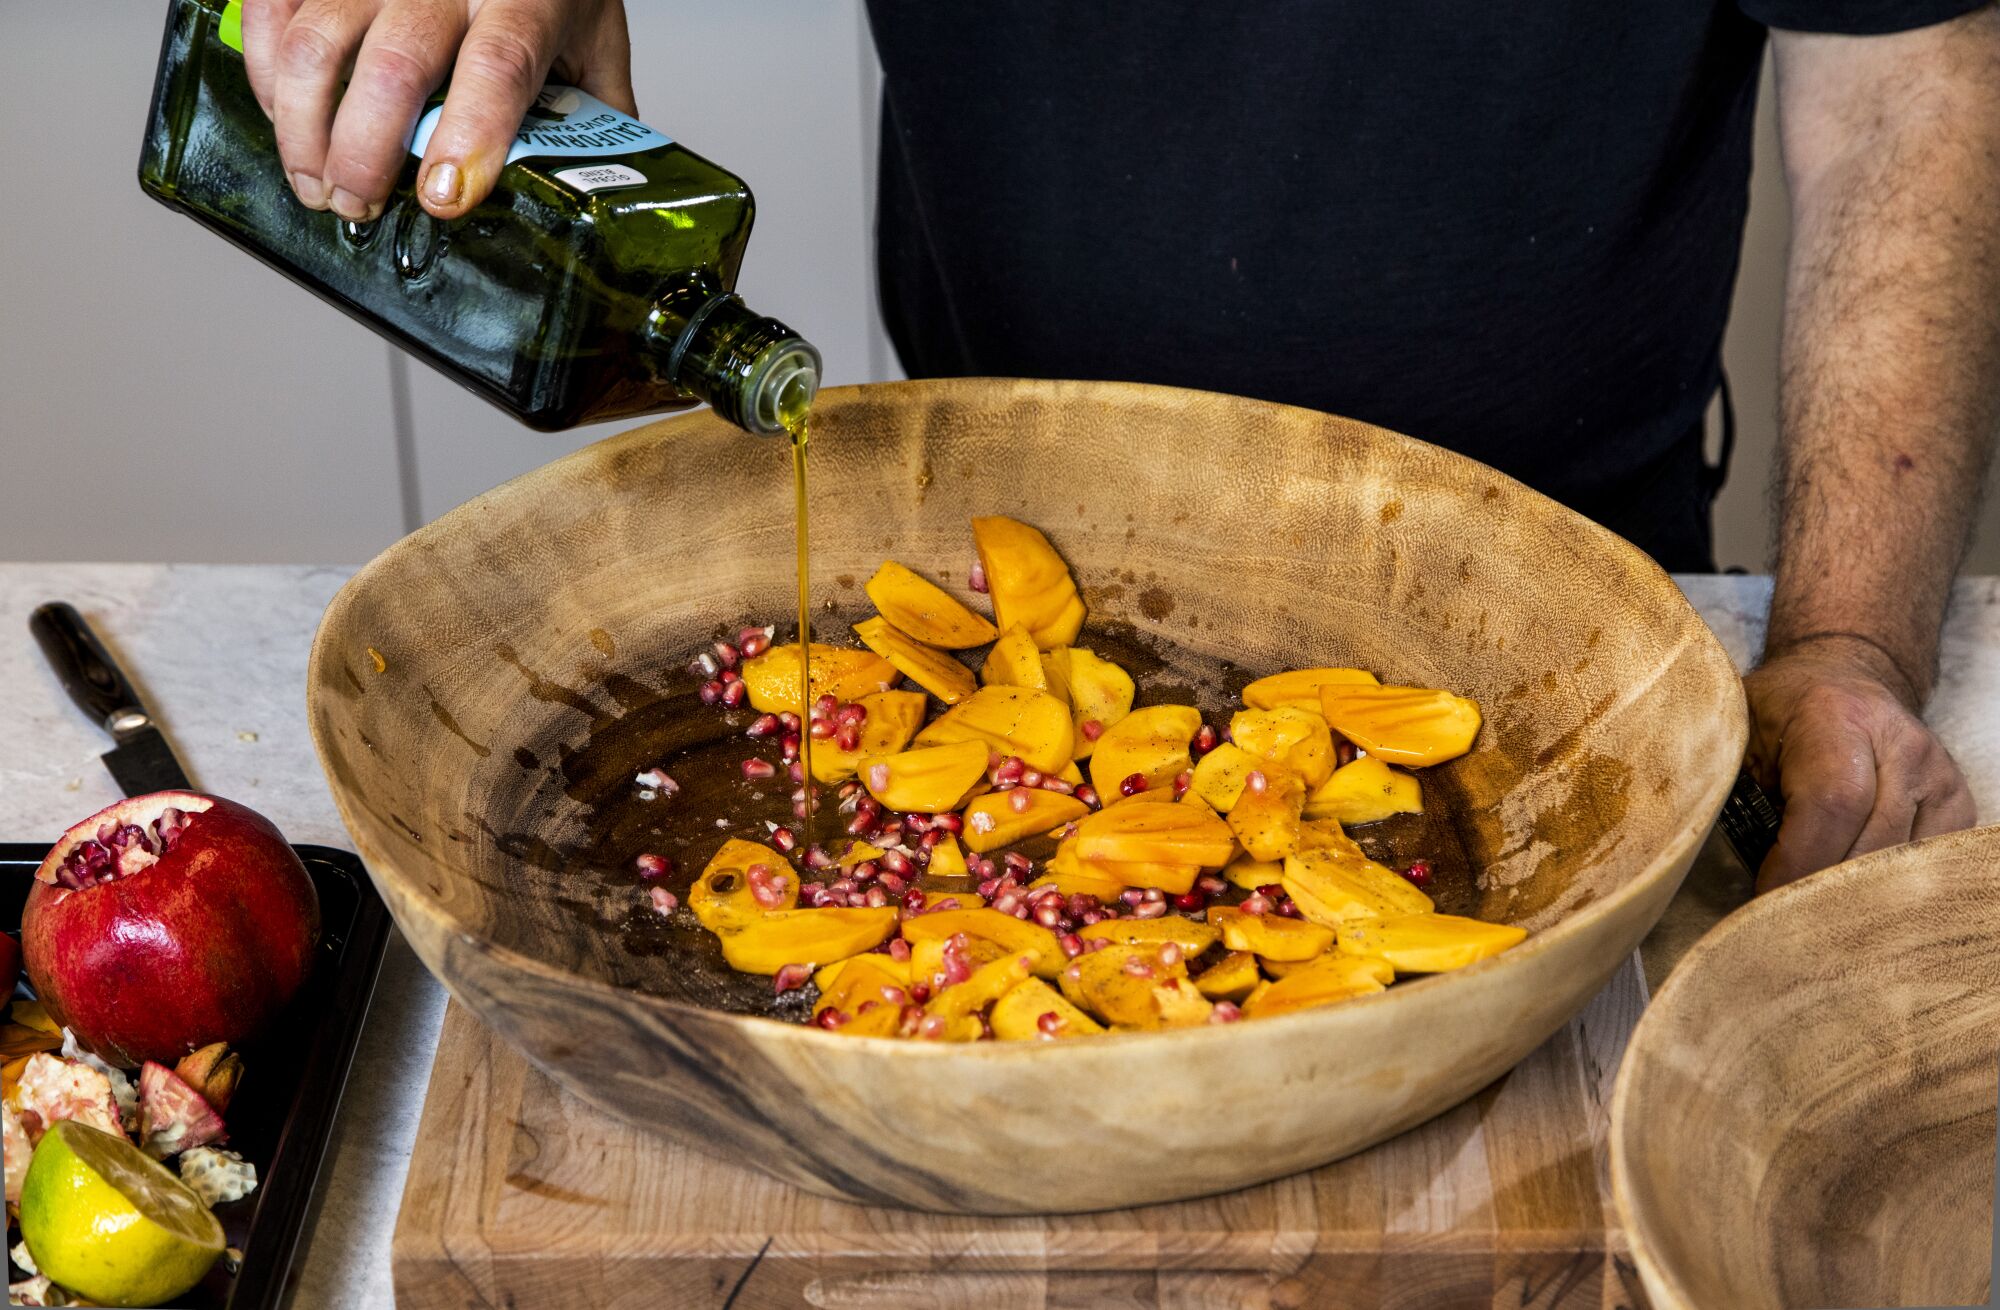 A man pours olive oil into a salad of persimmon and pomegranate seeds.